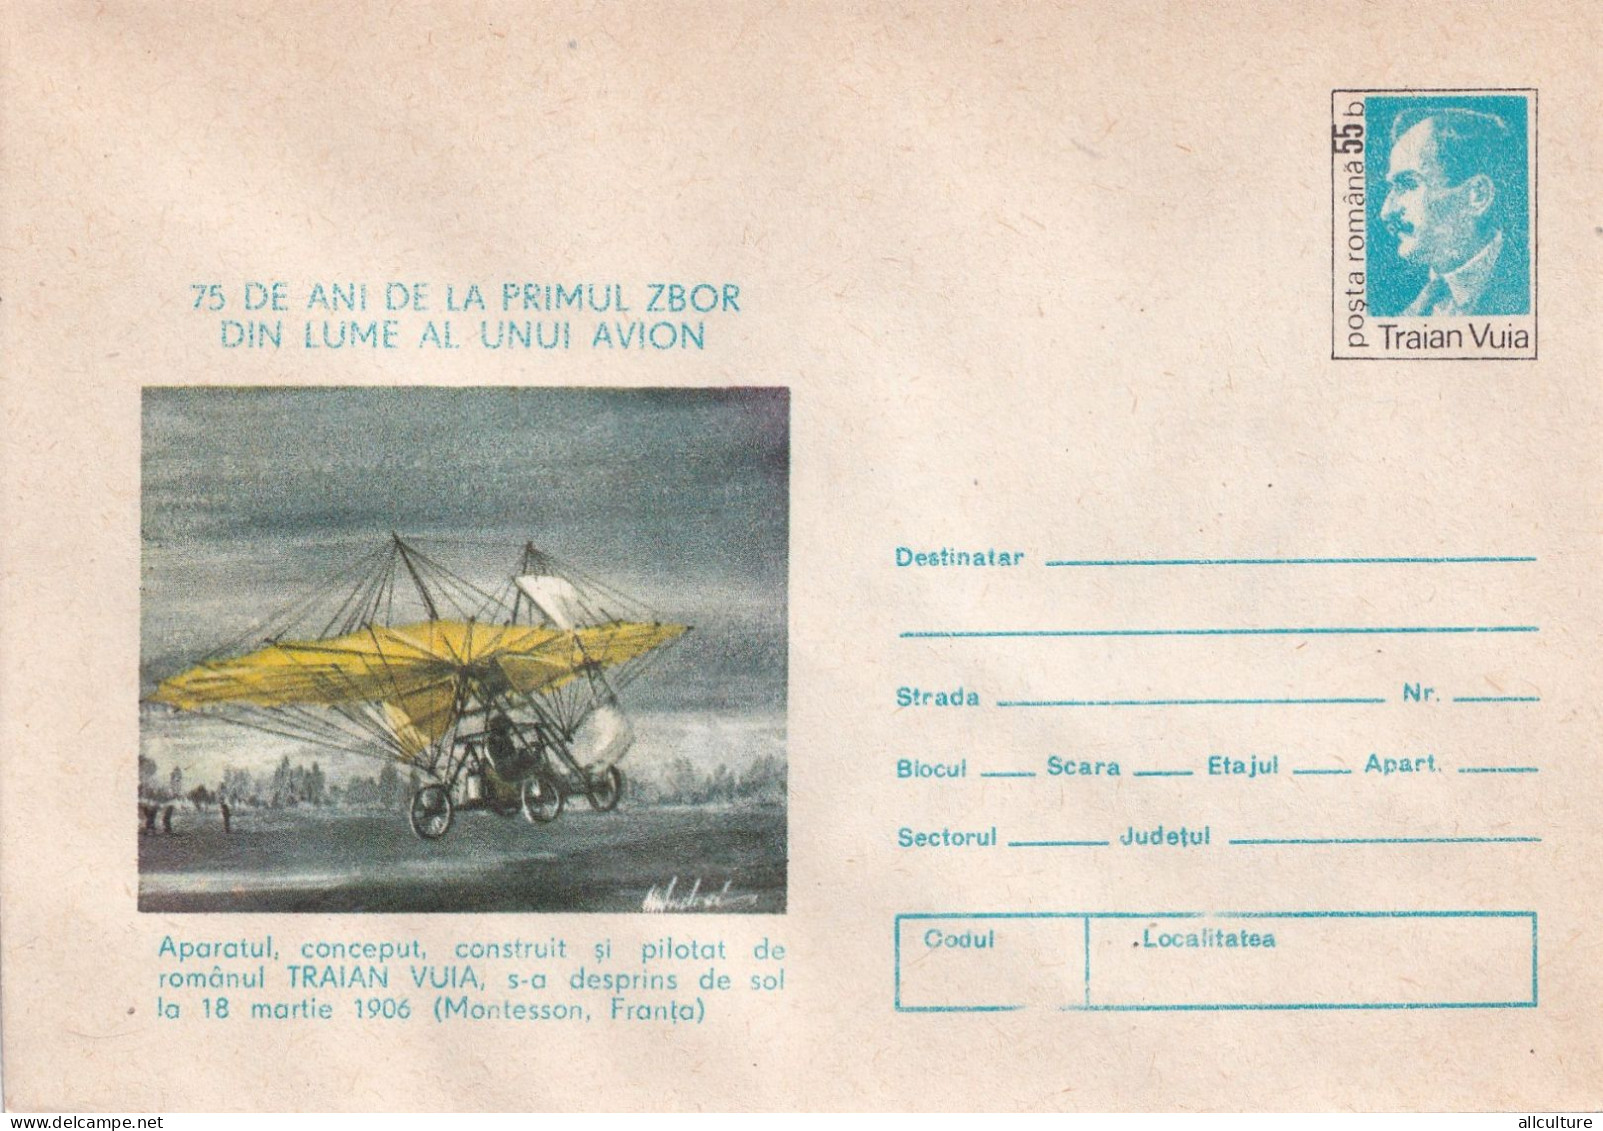 A24658 - PLANES, TRAIAN VUIA, FIRST FLIGHT OF A PLANE, COVER STATIONERY, ENTIER POSTAL, 1981 - Enteros Postales